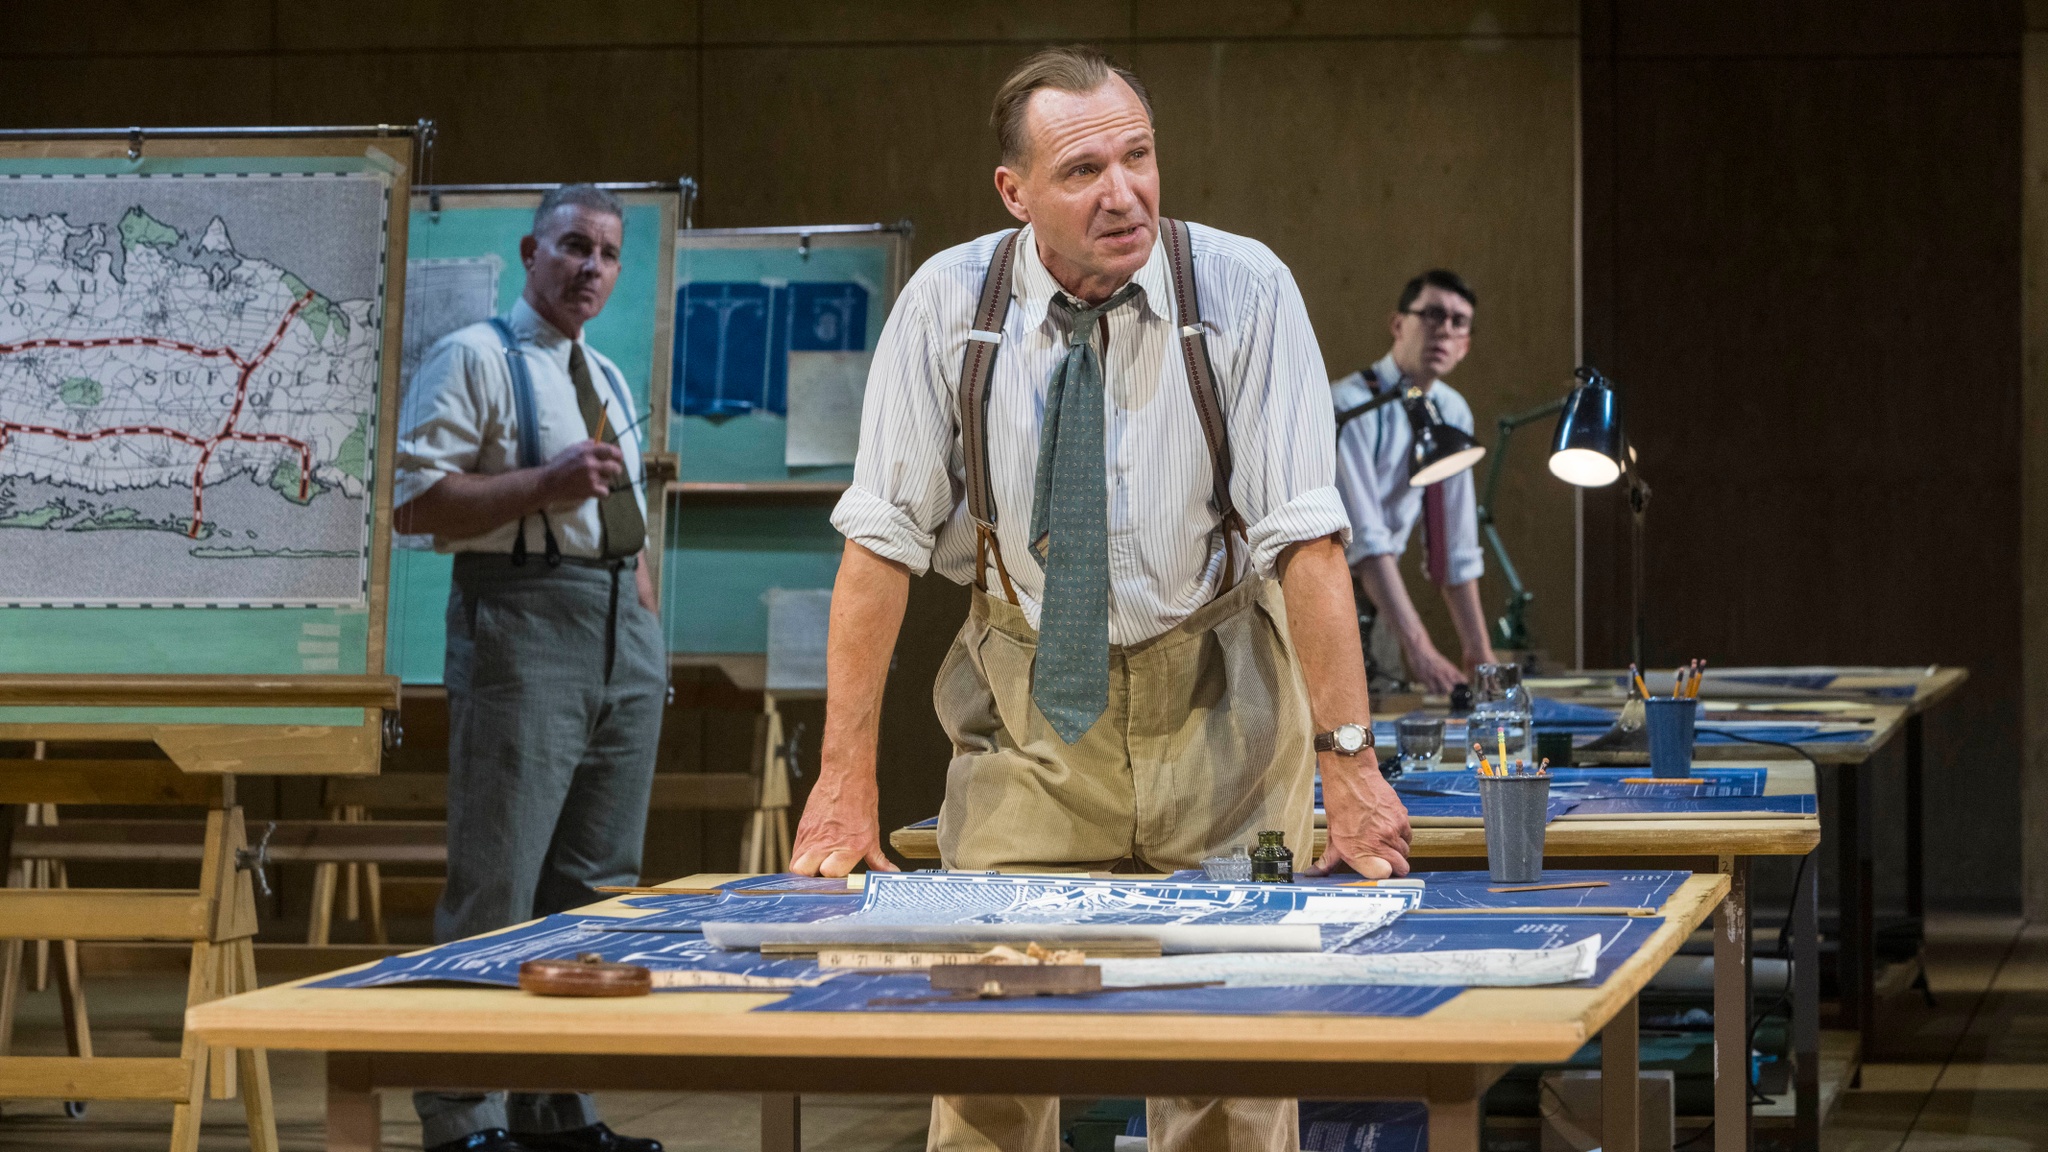 The actor Ralph Fiennes, a white man, stands leaning with both hands on a draftsman's table. He is in costume as Robert Moses, wearing khaki pants, suspenders, and a blue gray blue tie. In the background are two other actors dressed similarly looking toward him.